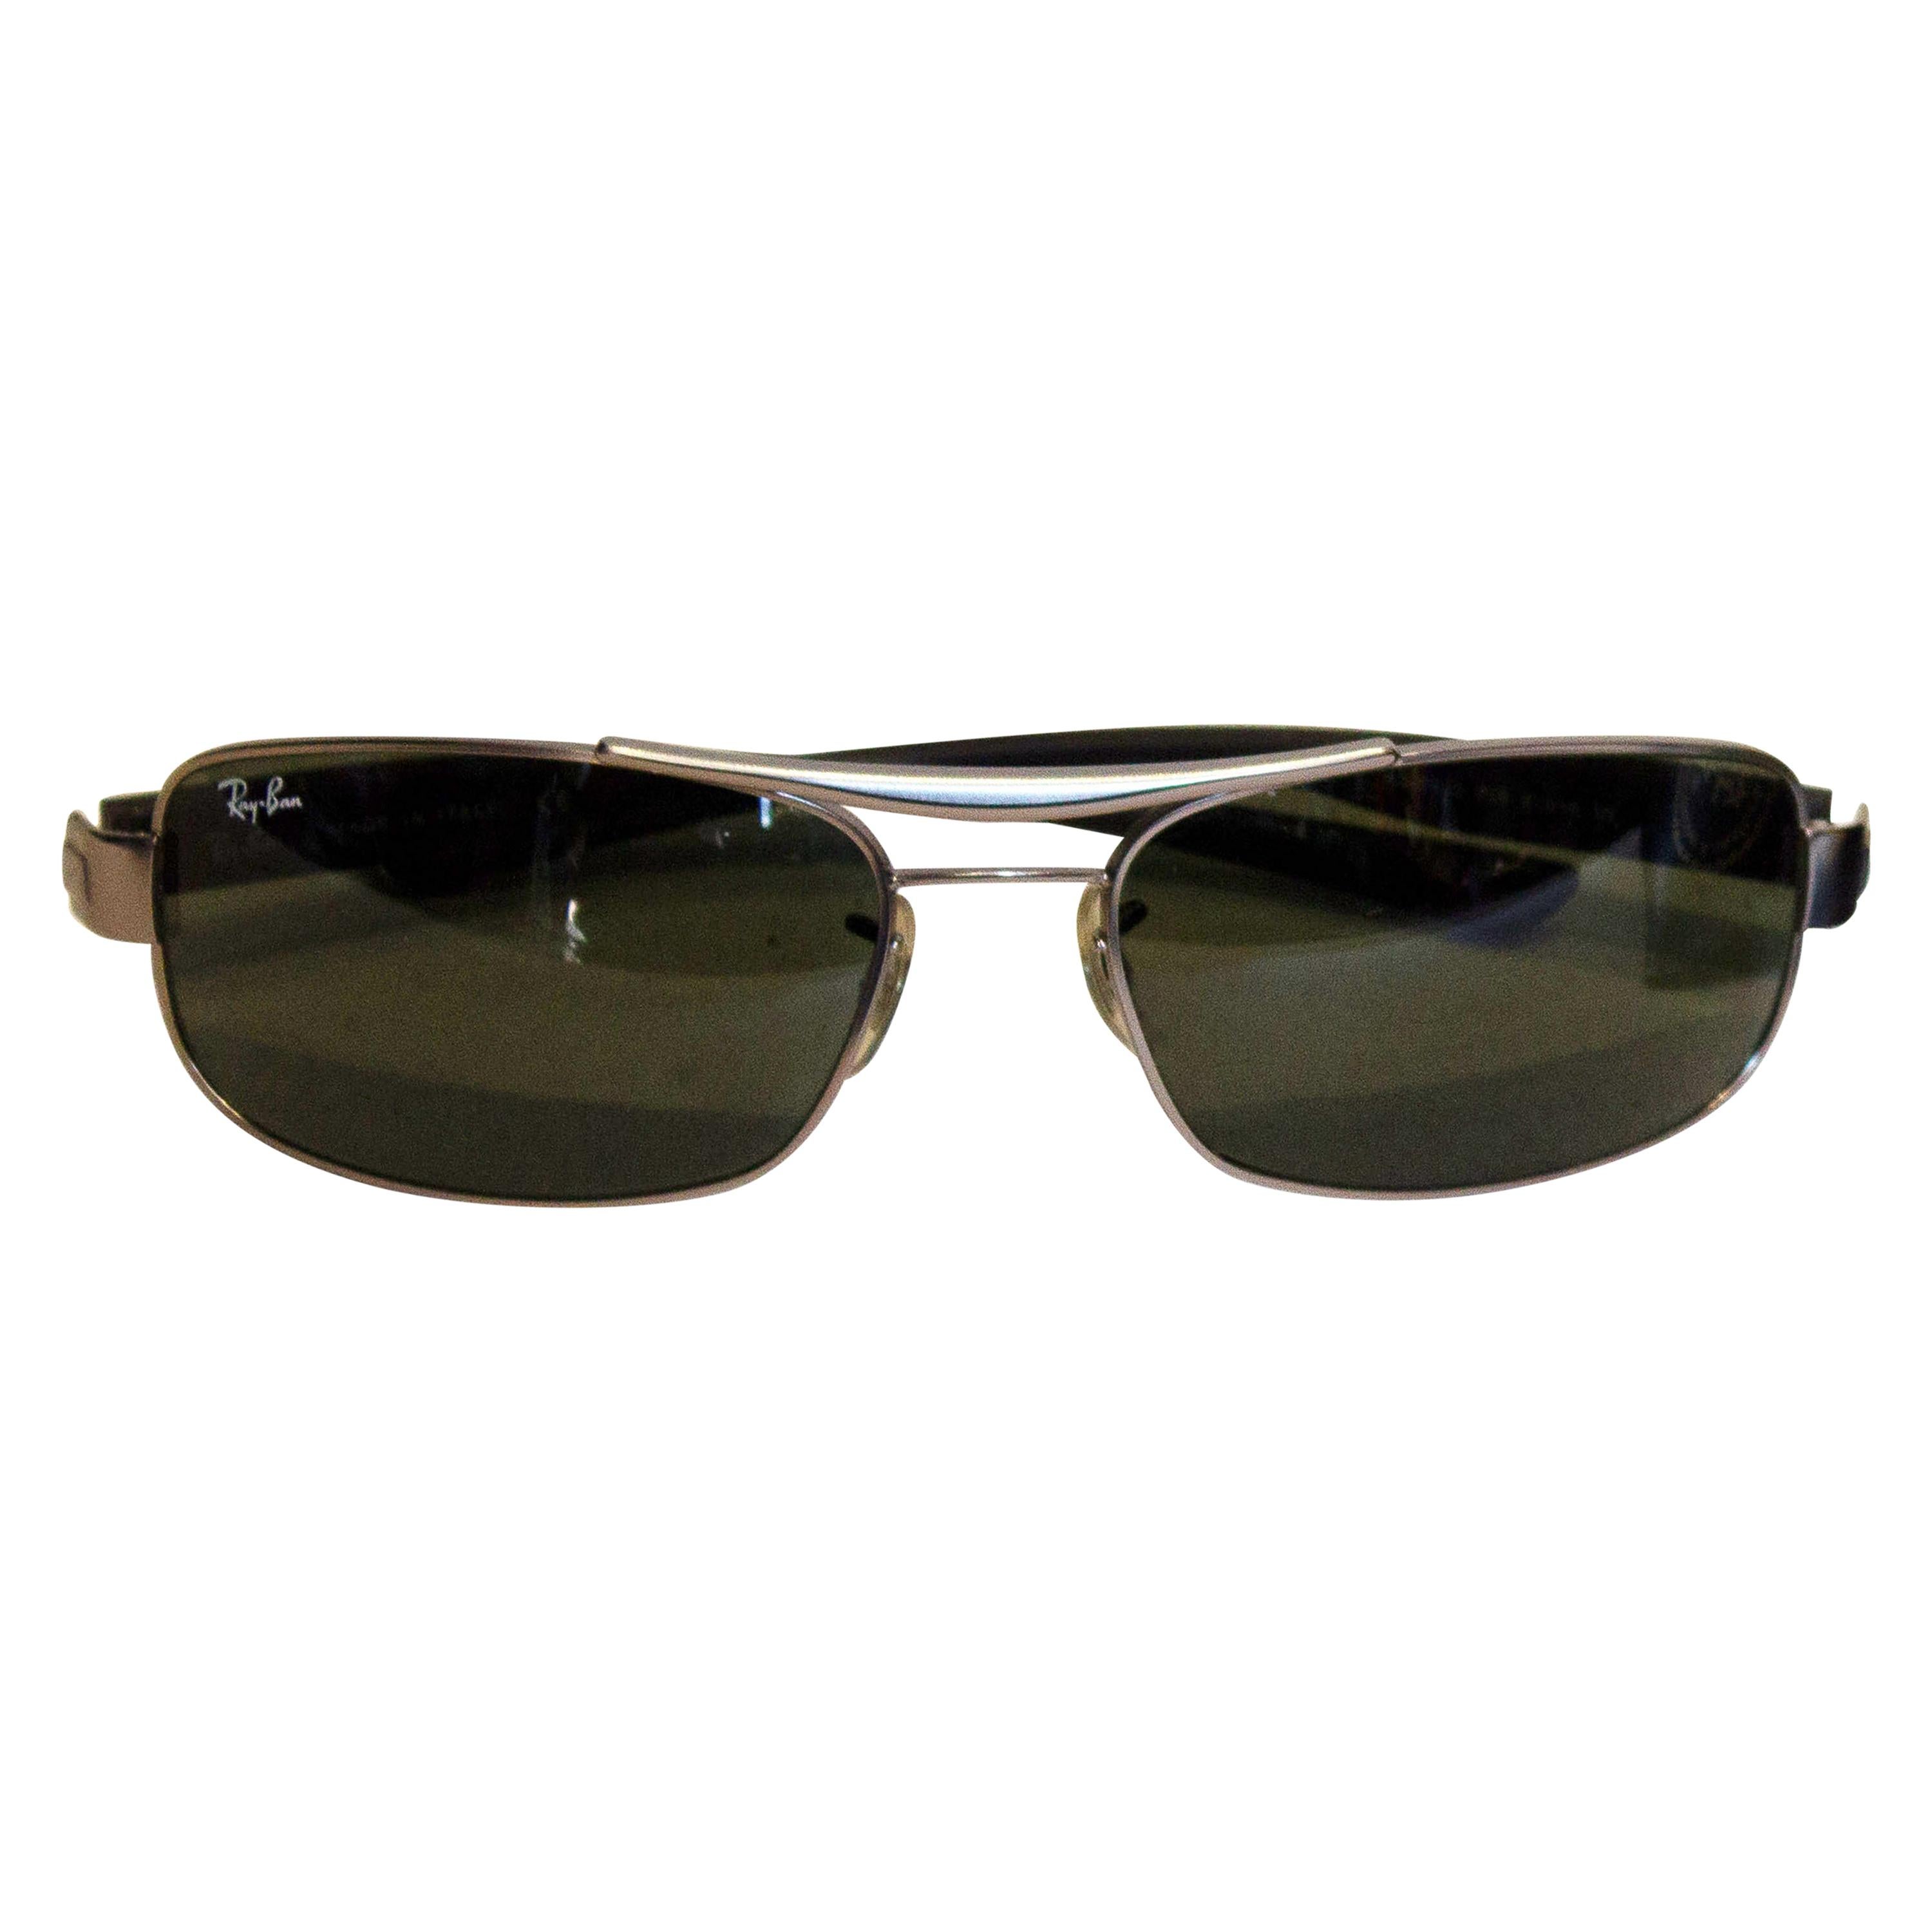  Ray Ban-Sonnenbrille